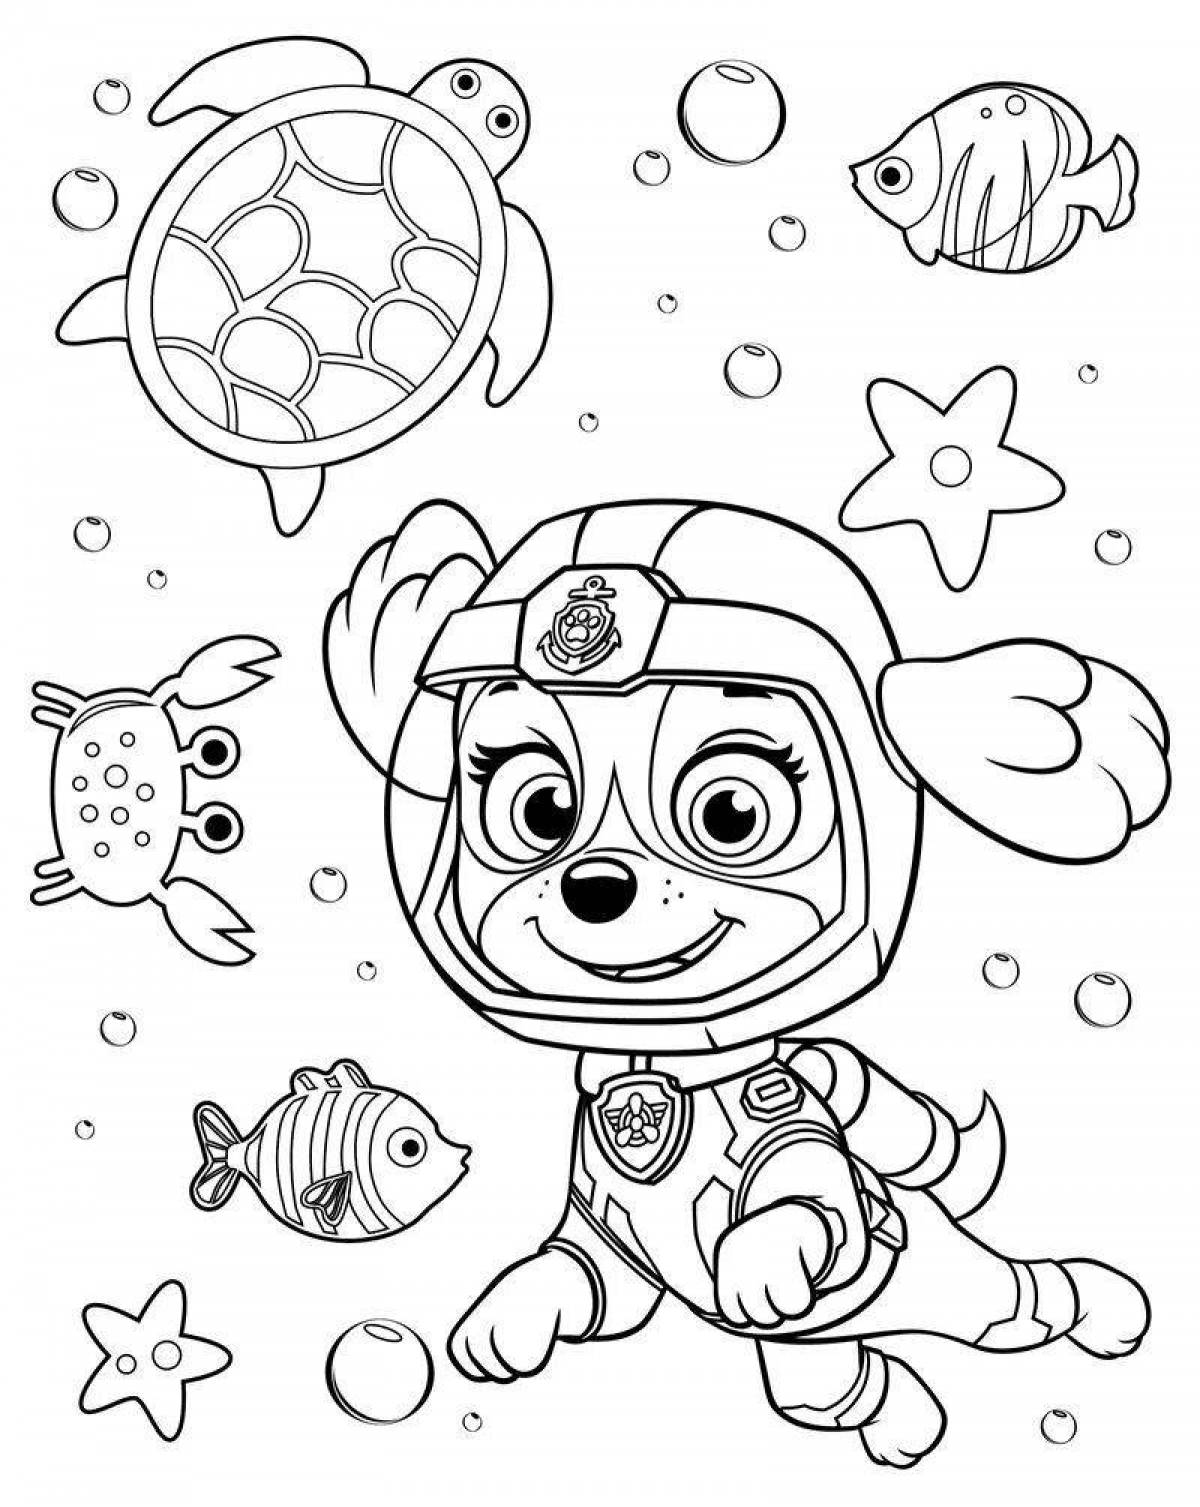 Friendly paw patrol coloring book for kids 3 4